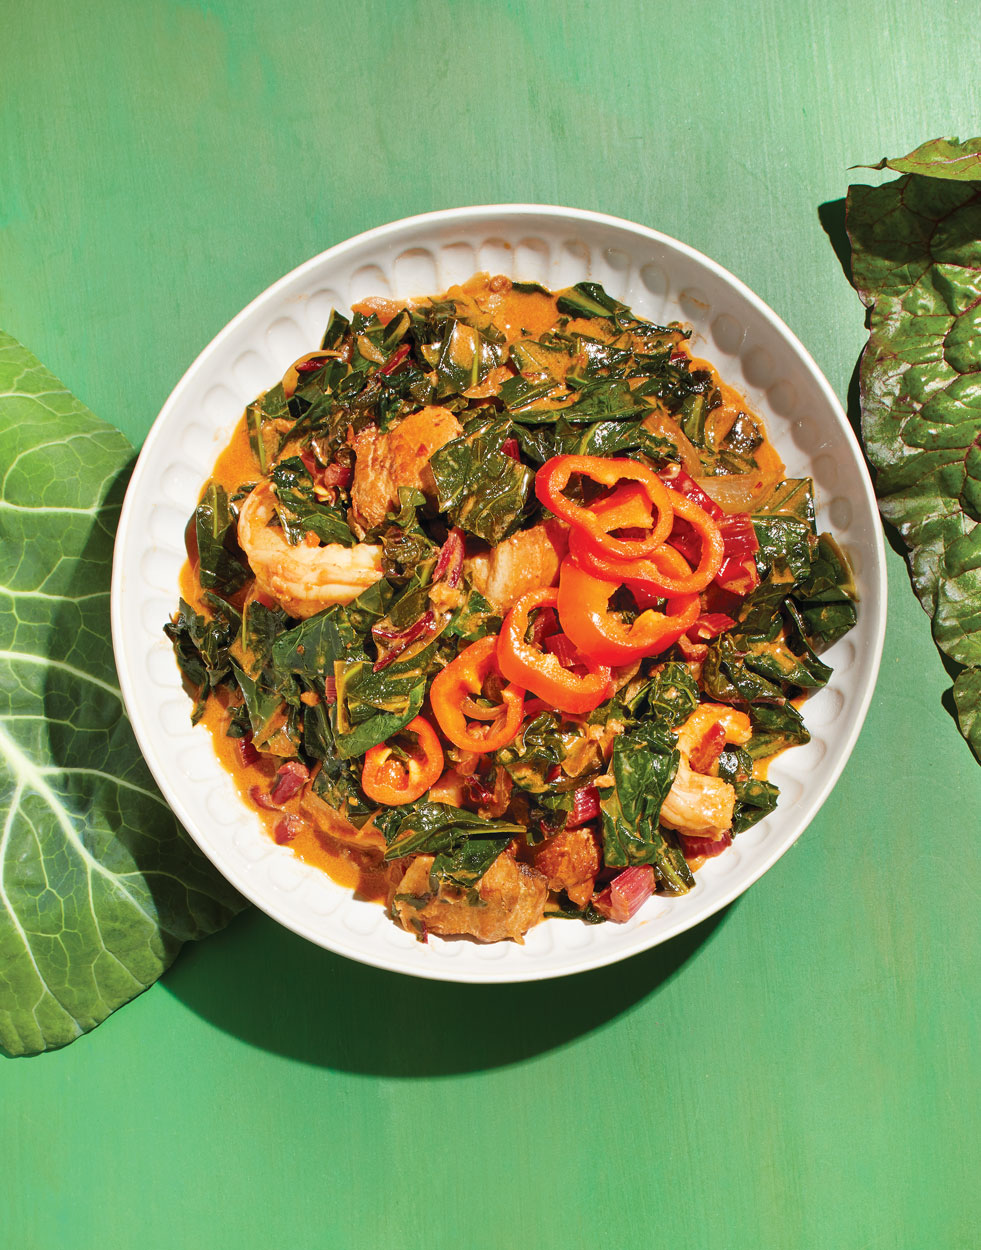 Laing with collards, kale, & chard